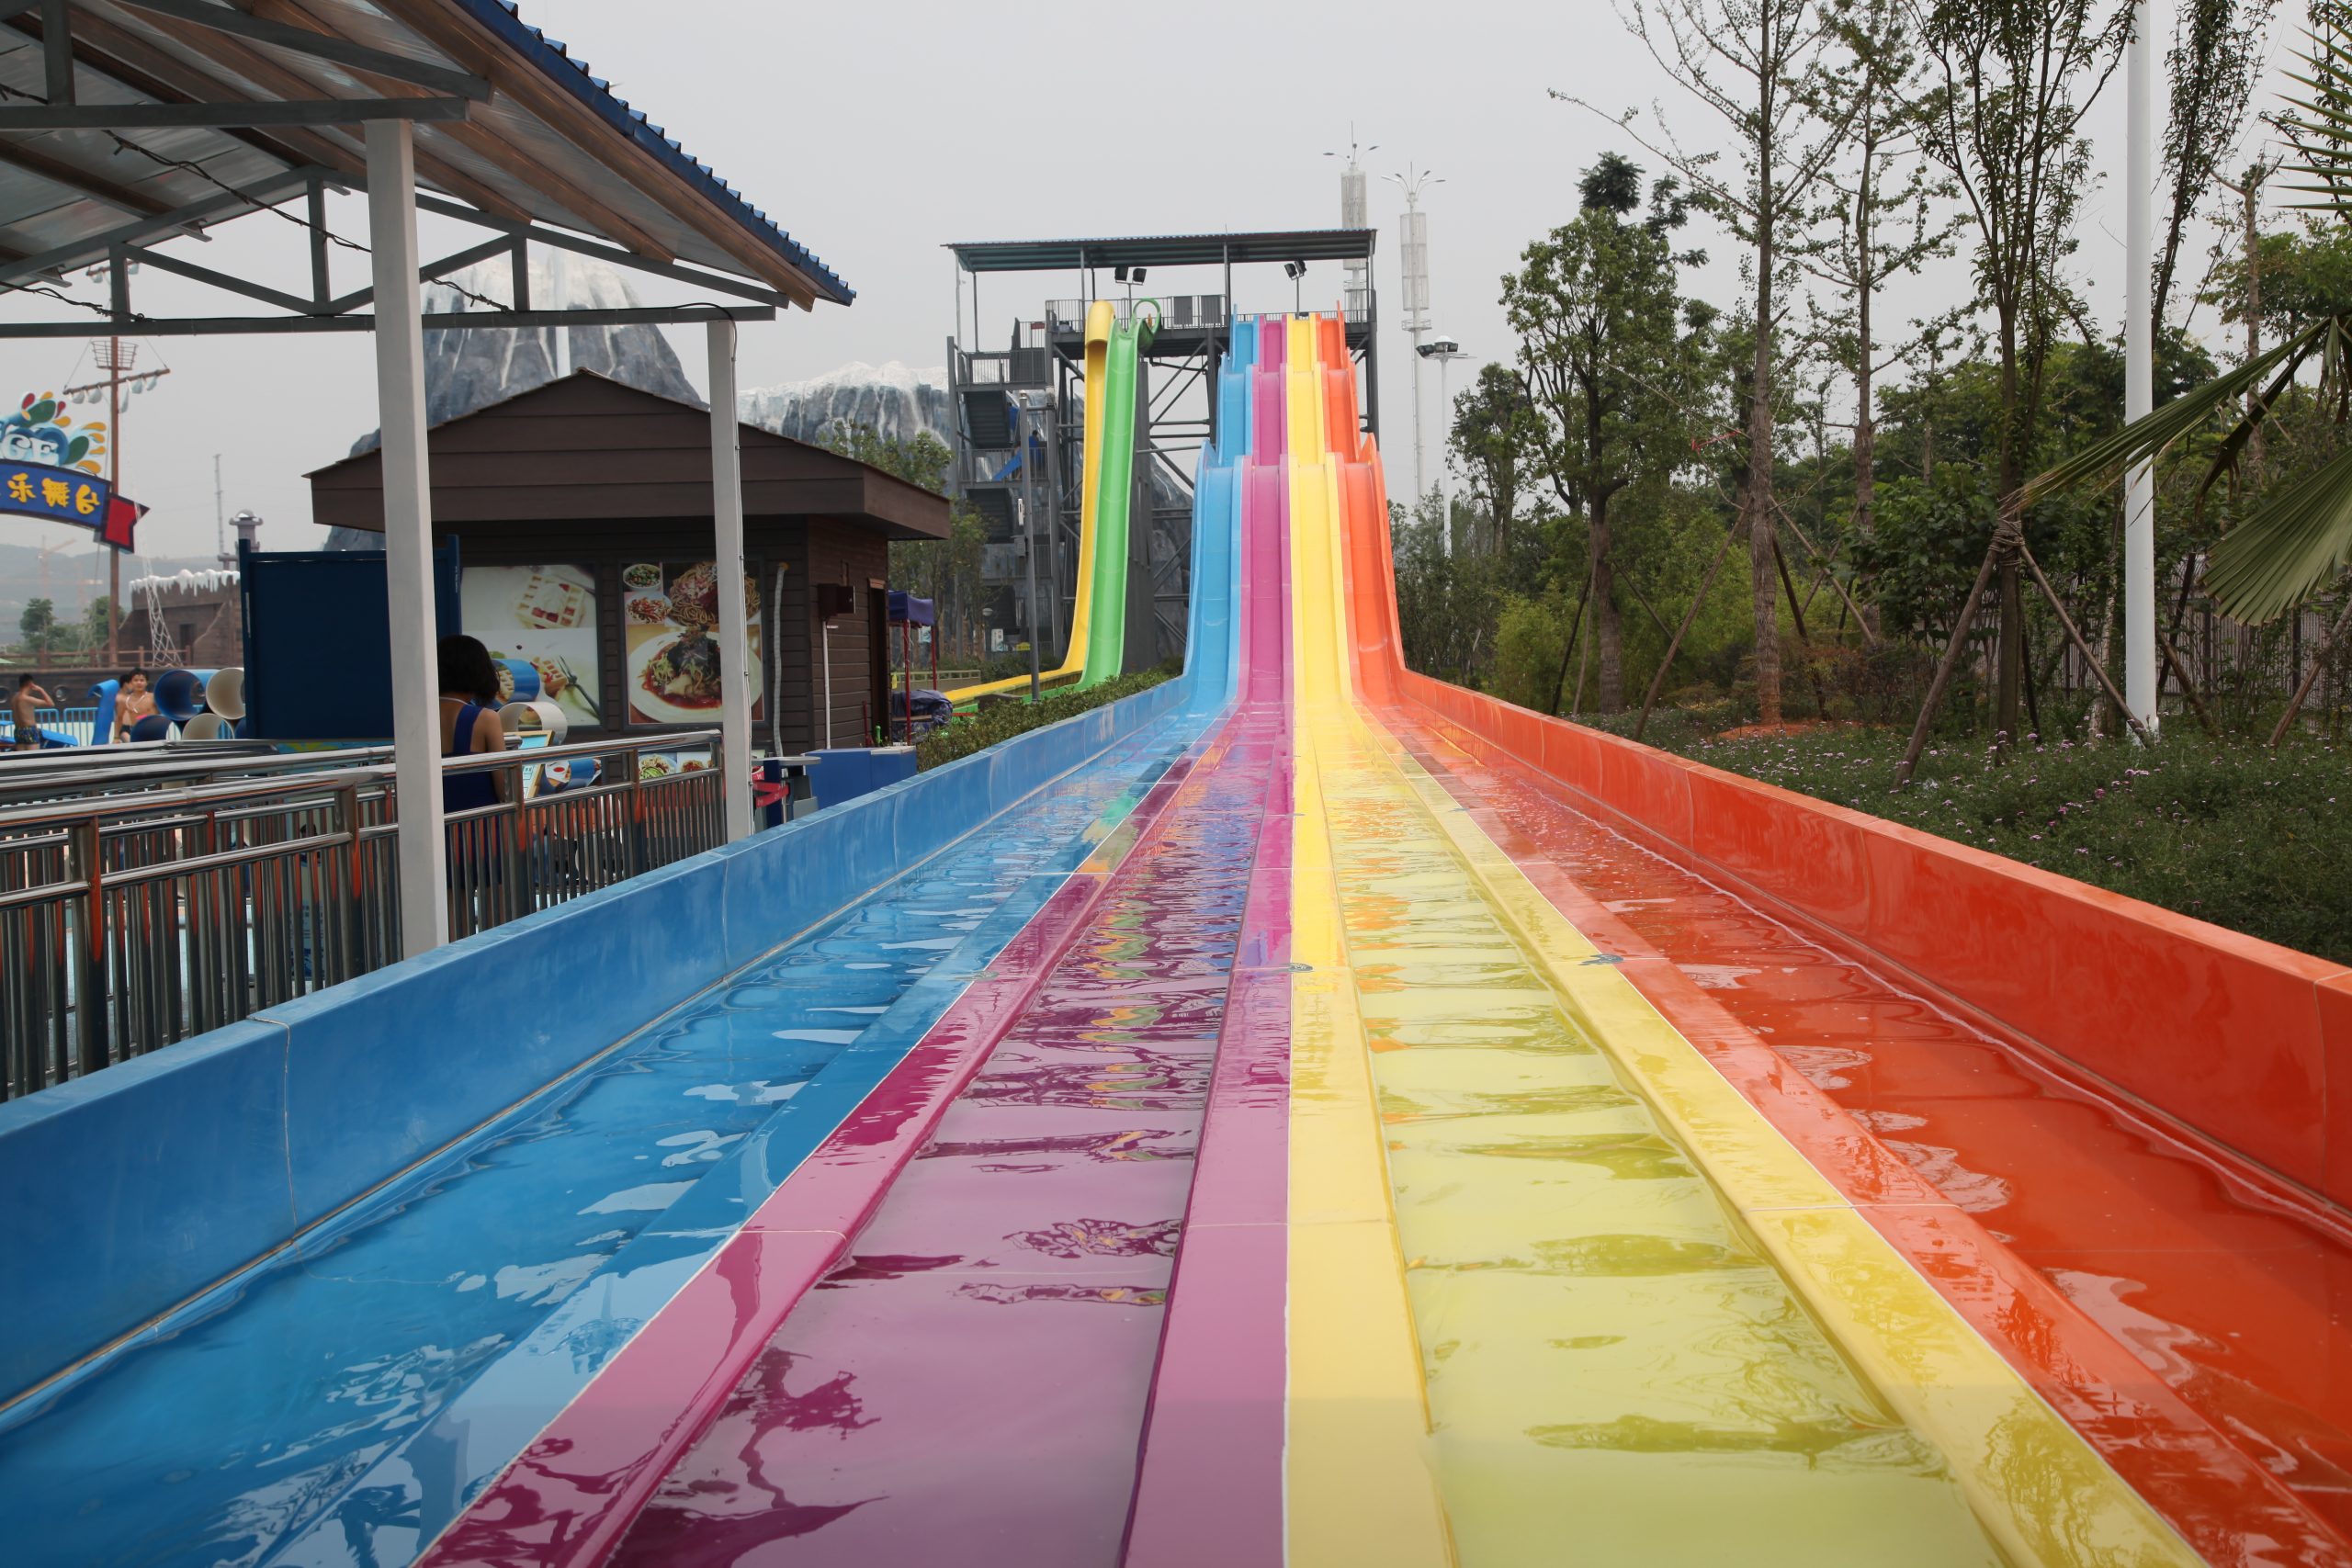 Water slides: from children’s amusement facilities to adult entertainment projects